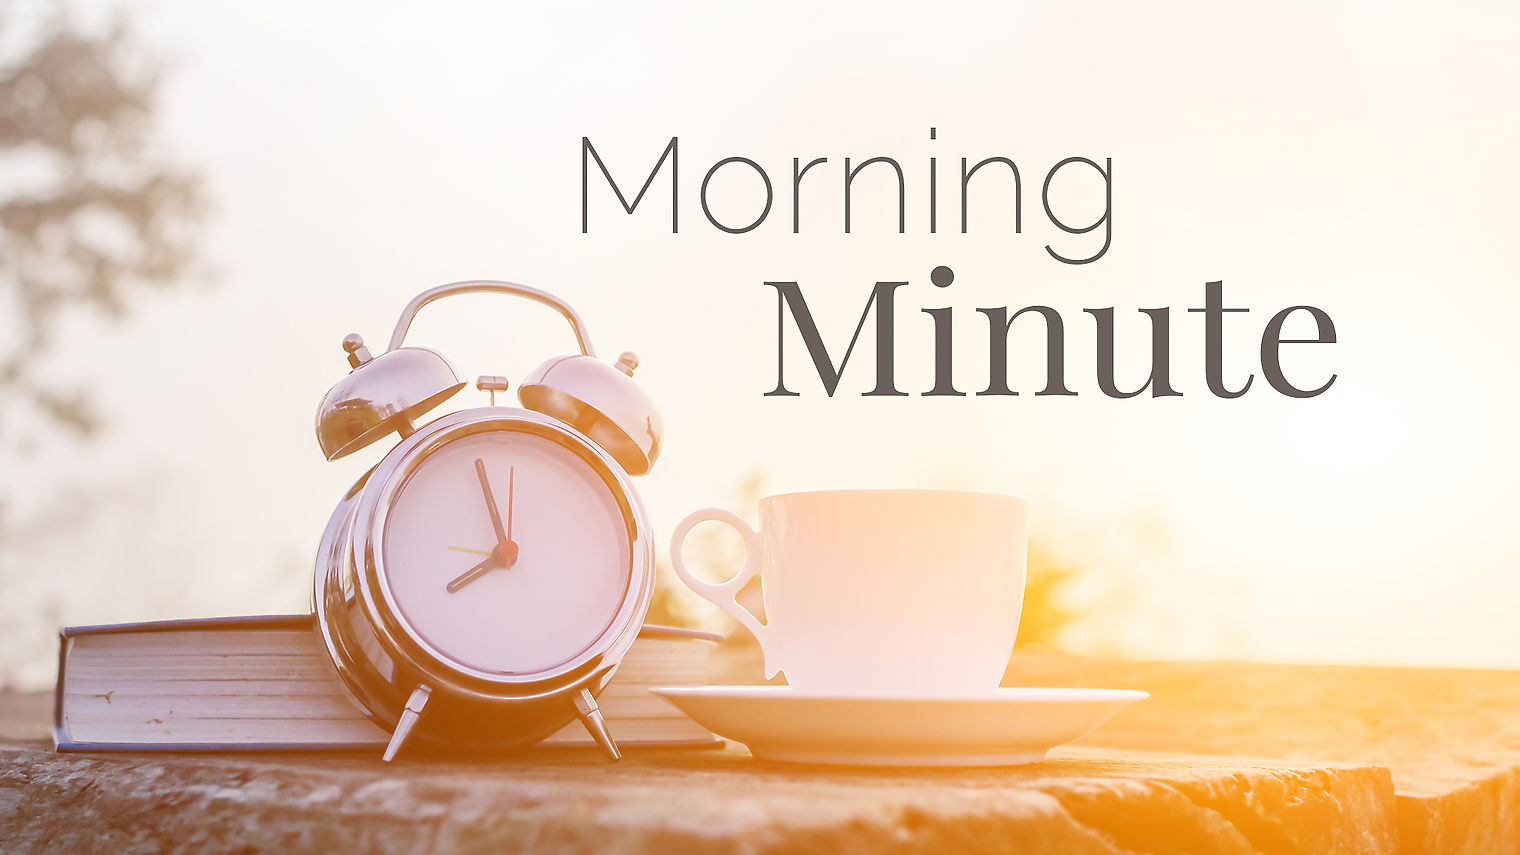 Morning Minute